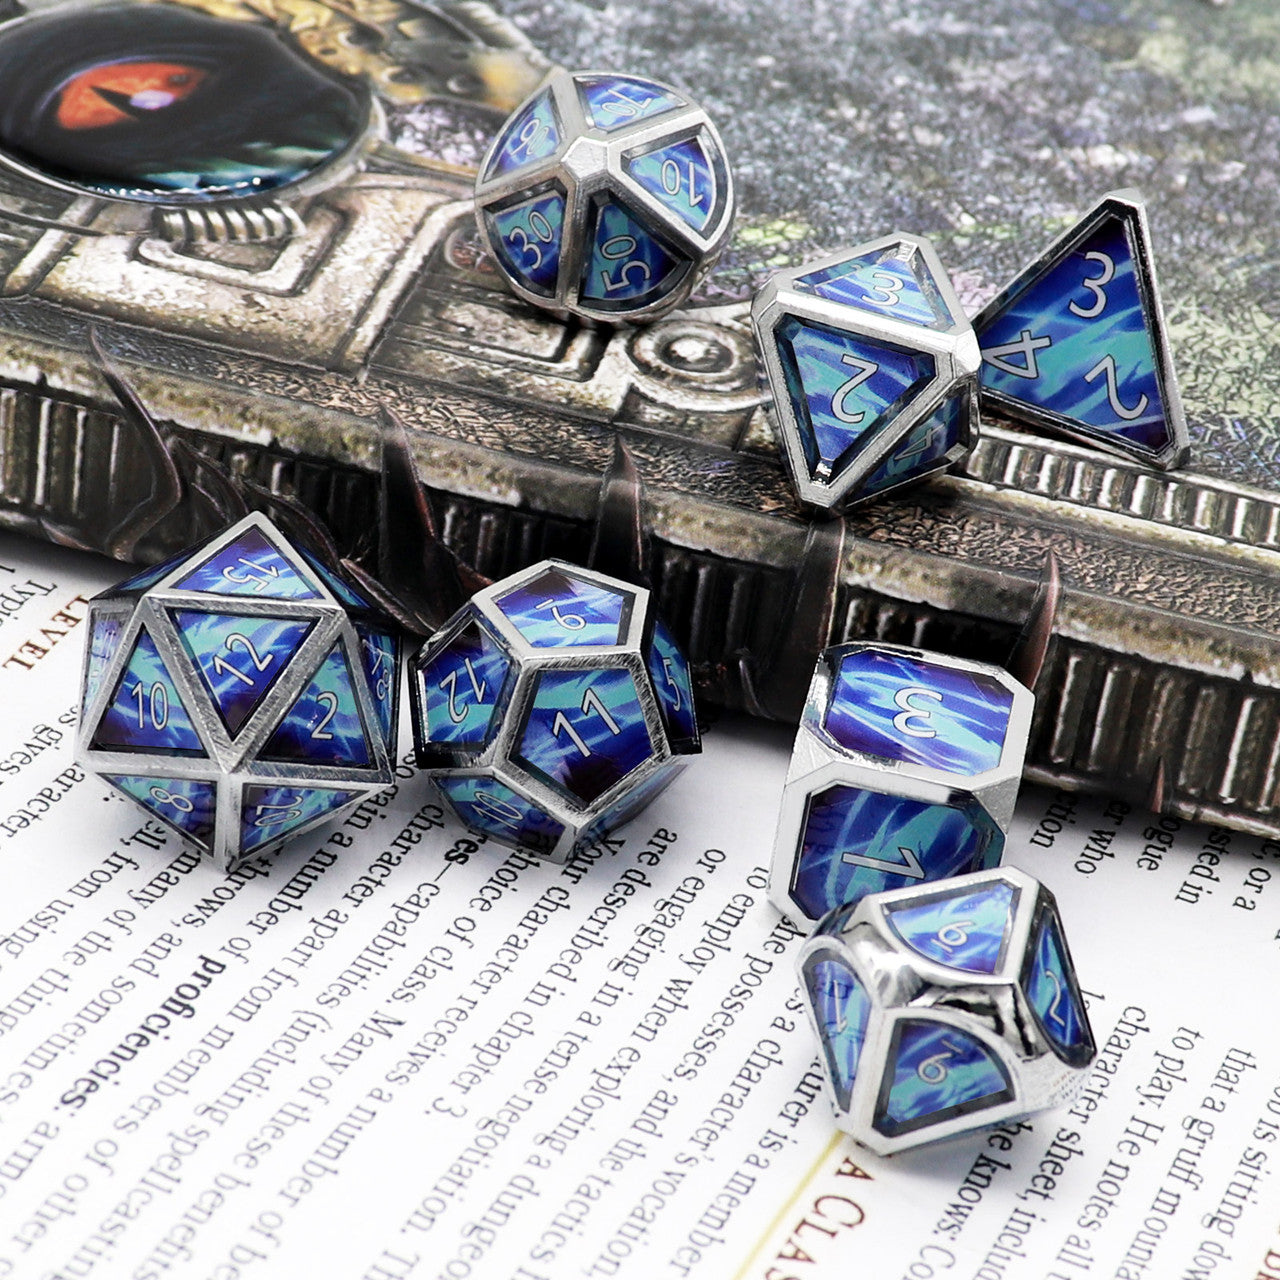 haxtec cold snap spell dnd dice set silver blue purple metal real scene rpg dice